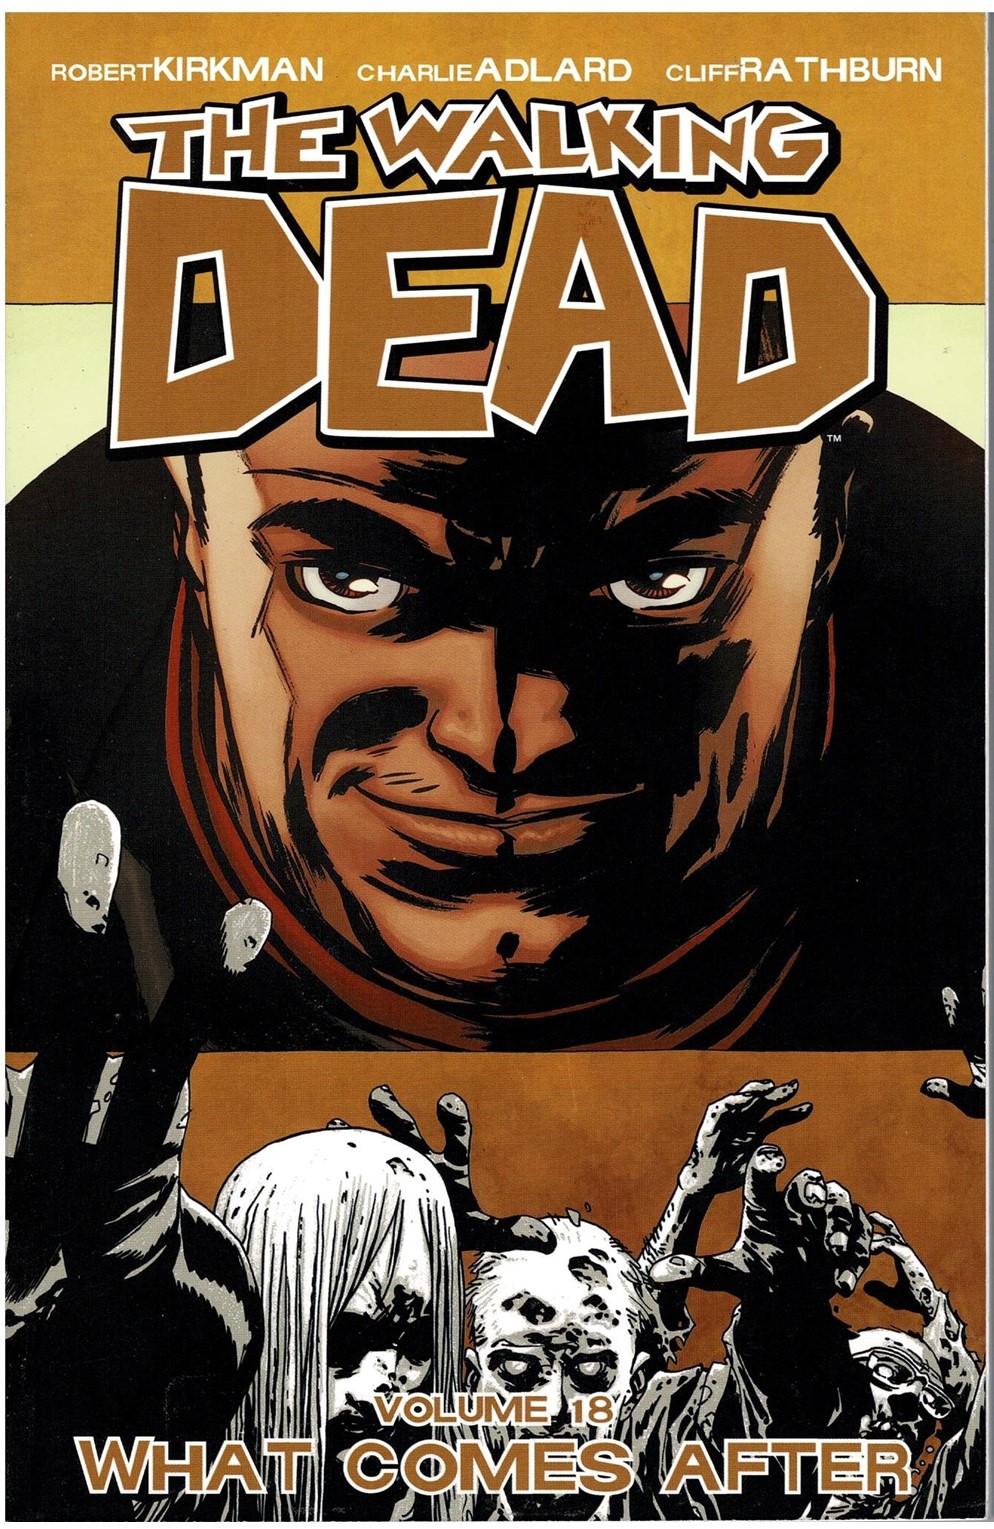 The Walking Dead Trade Paperback Volume 18 What Comes After - Half Off!